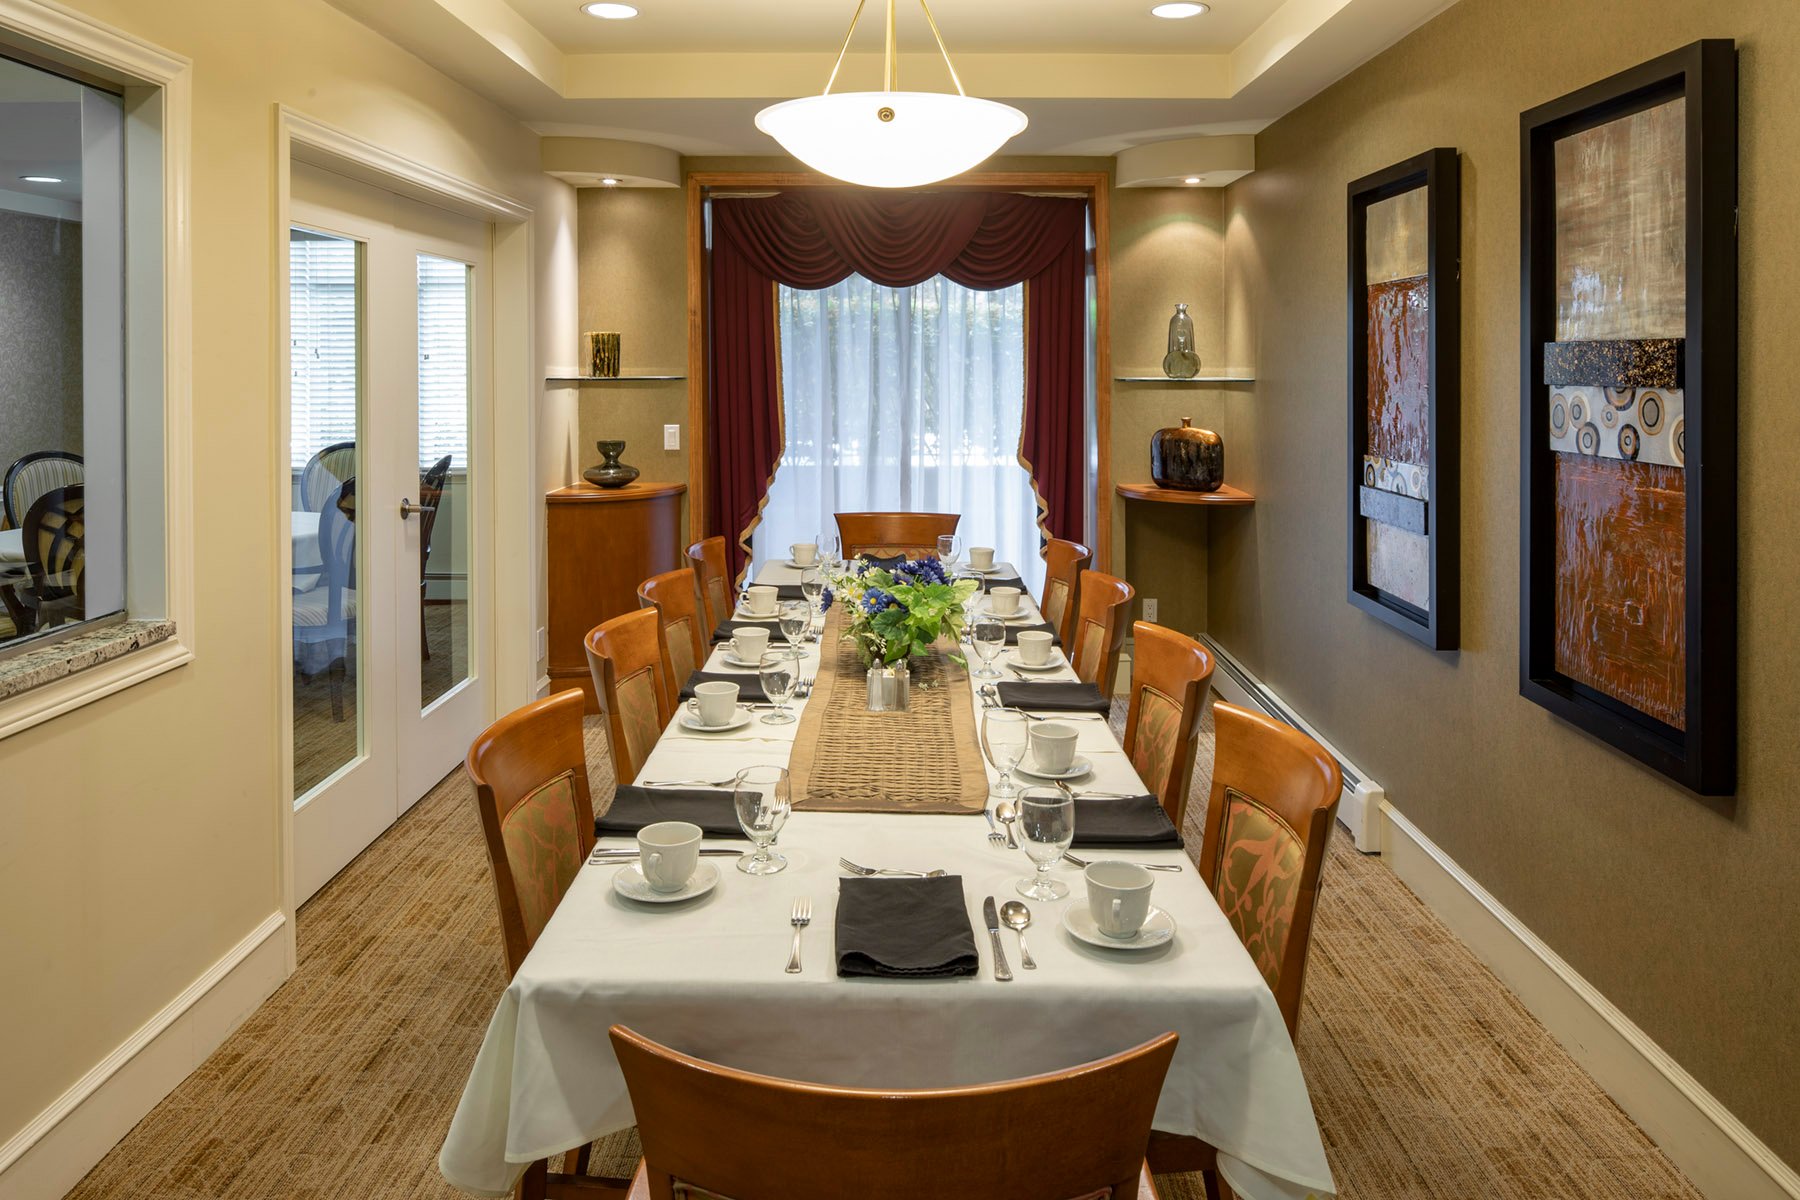 Private dining room at Mayfair Terrace Retirement Residence